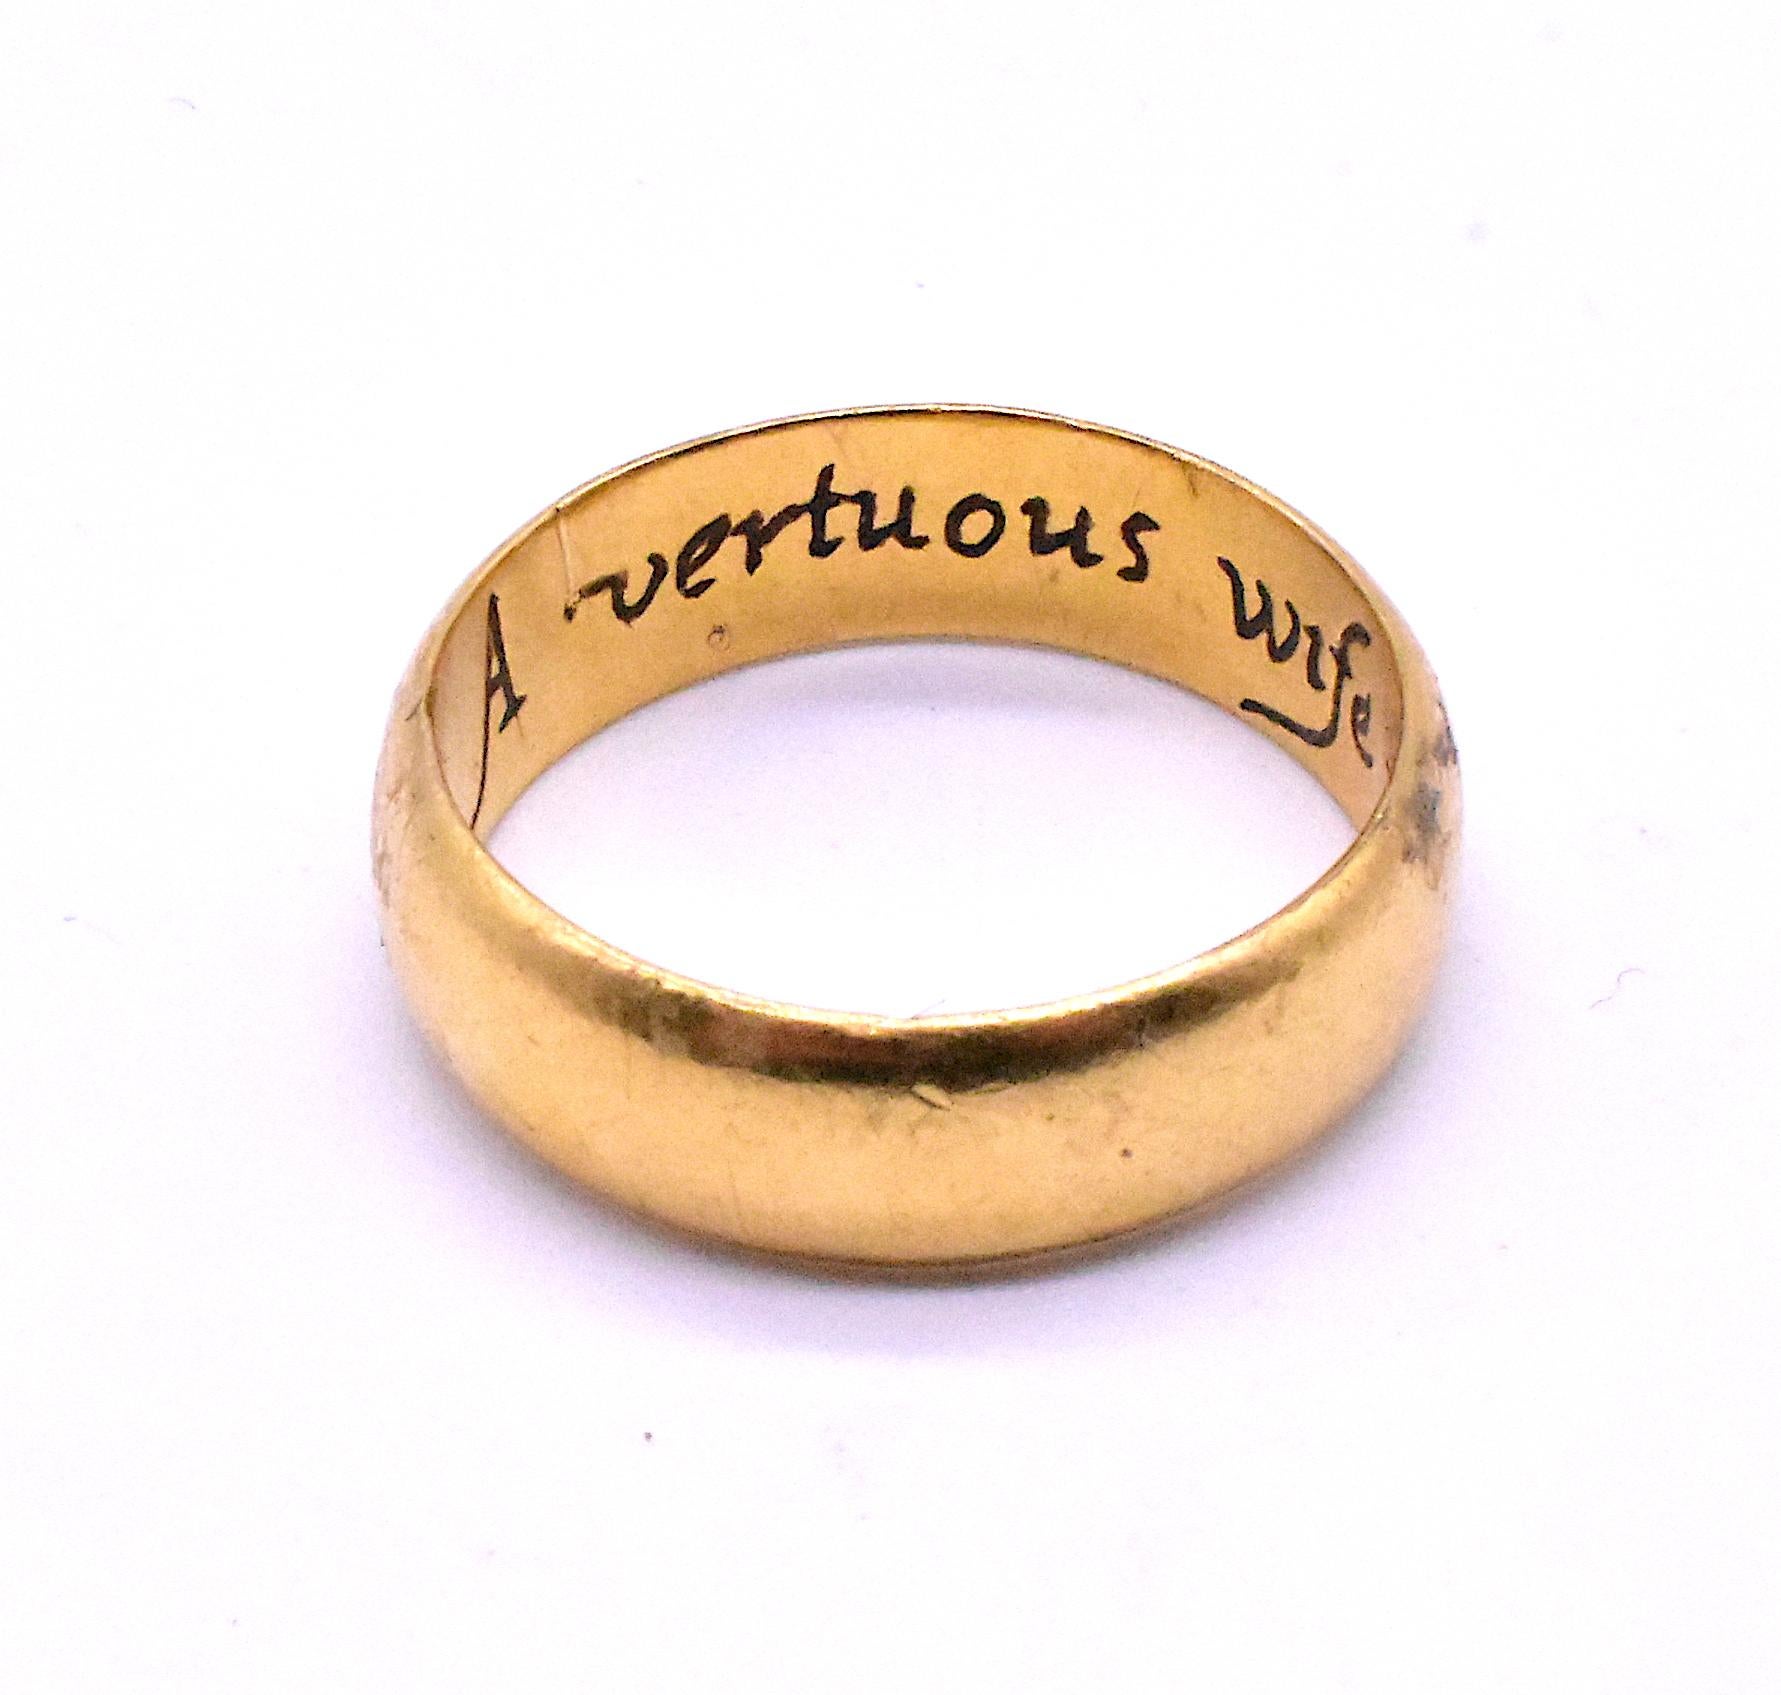 Poesy rings were popular in England and France during the 16th through the 17th centuries as lover's gifts. The quotations were often from courtship stories and are usually inscribed on the inner surface of the ring. Inscriptions were often